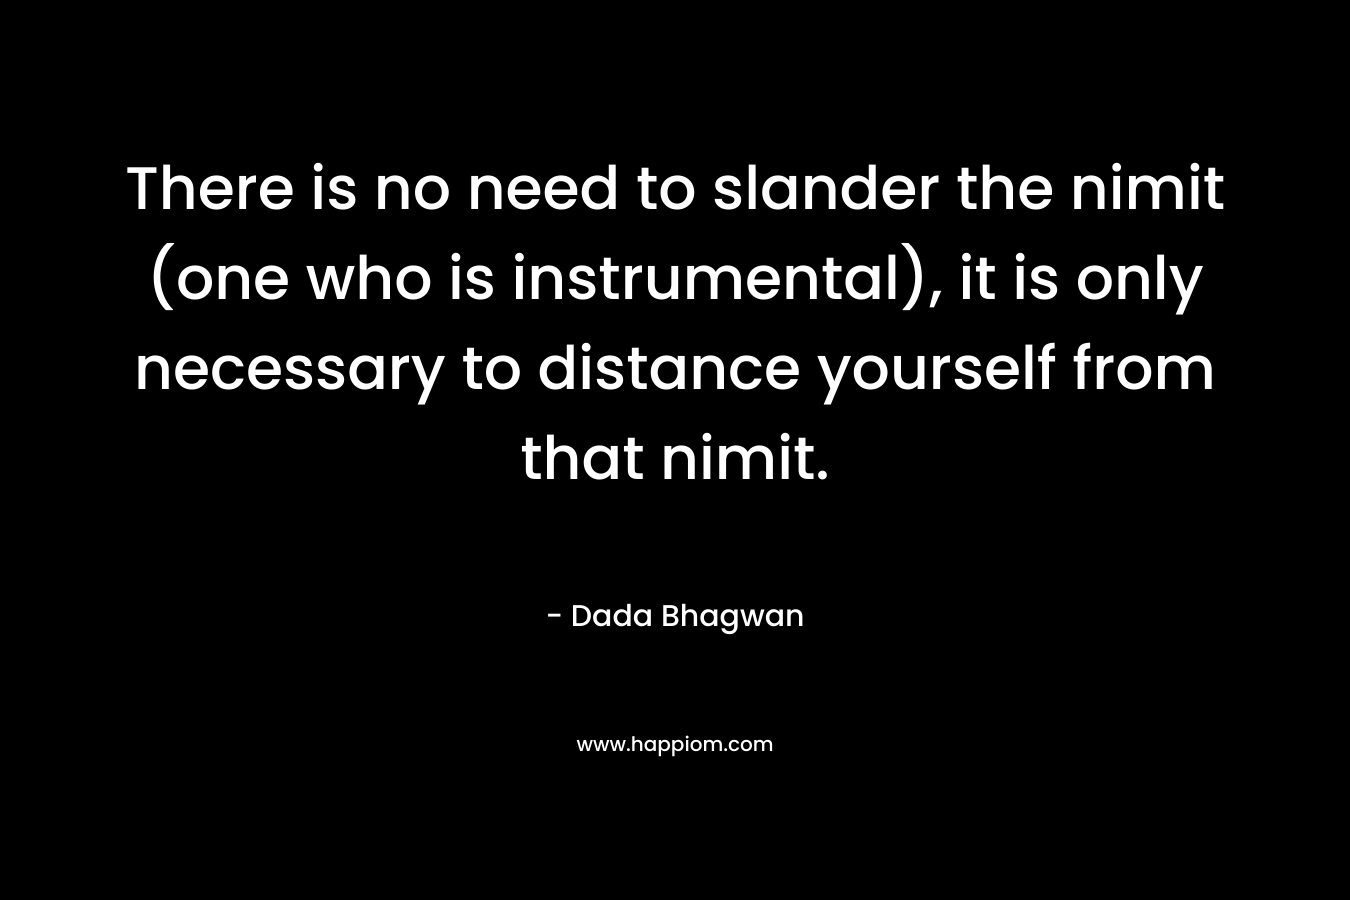 There is no need to slander the nimit (one who is instrumental), it is only necessary to distance yourself from that nimit.